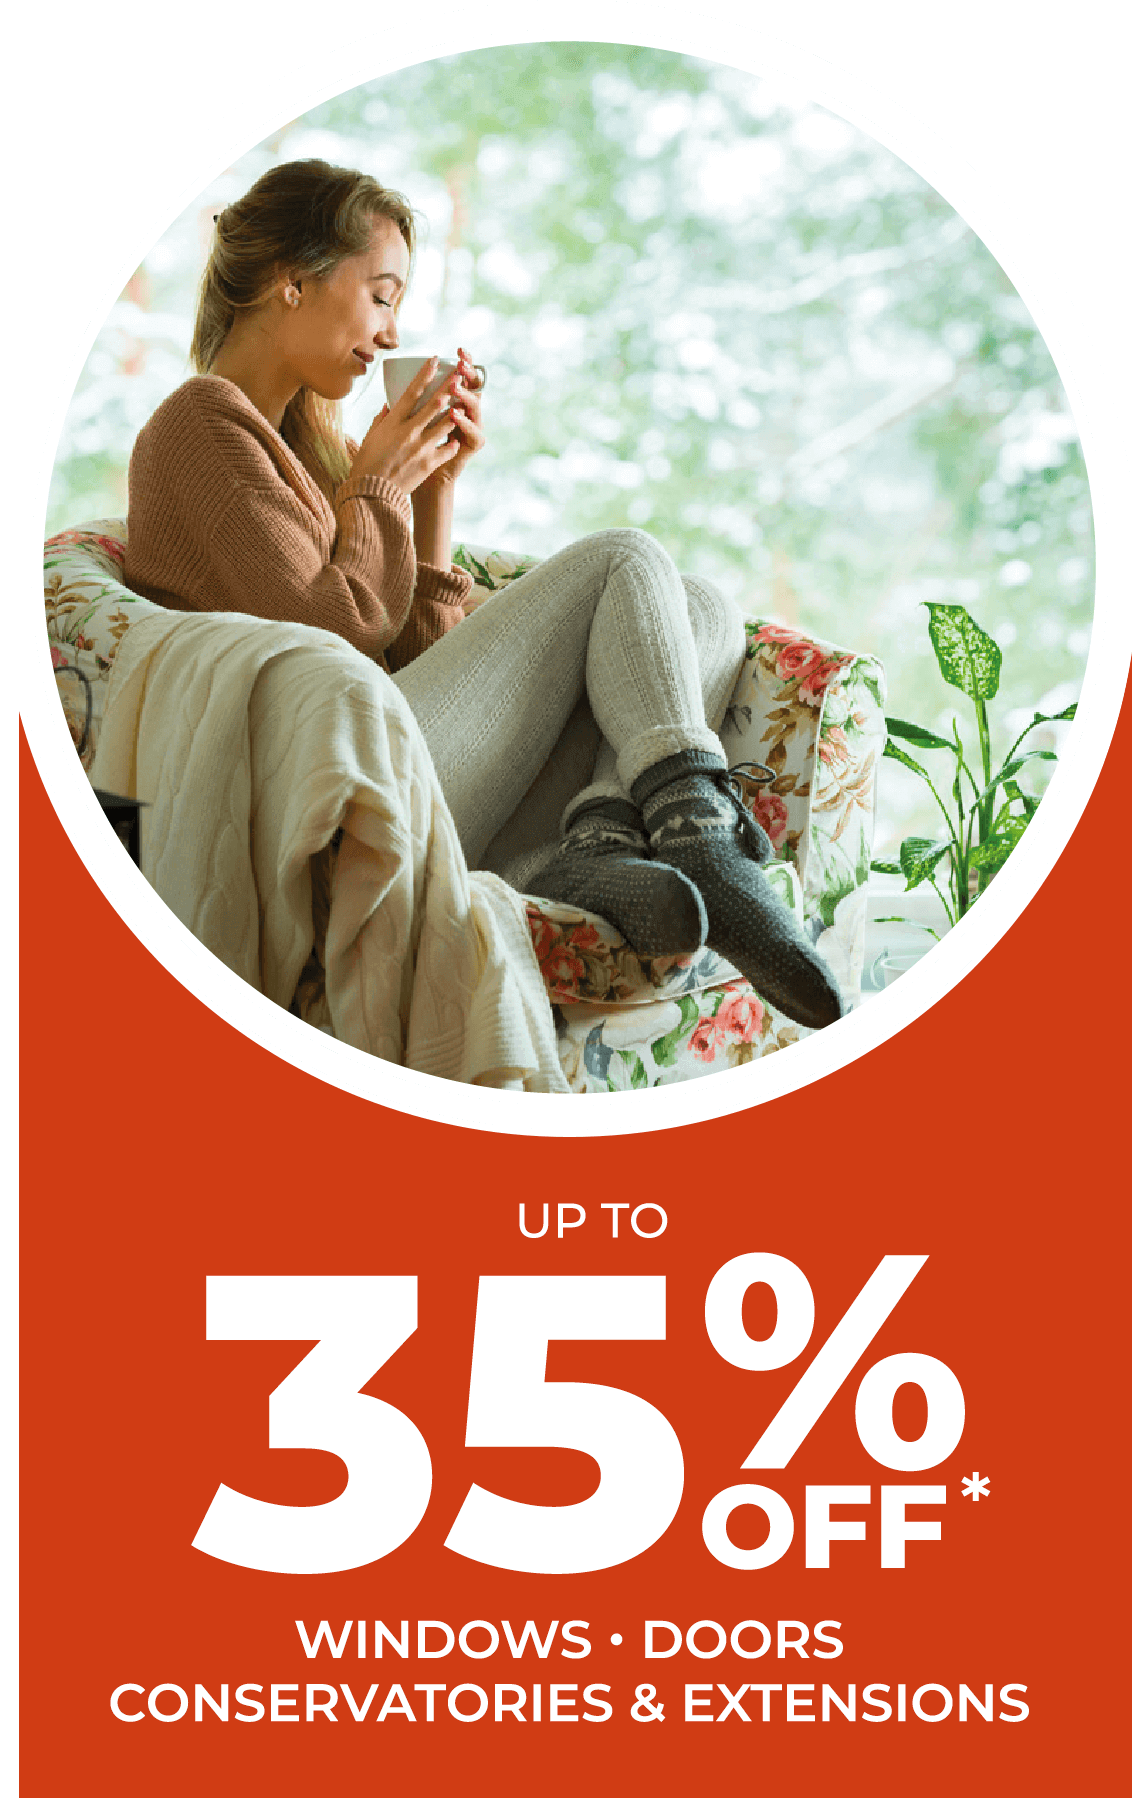 Up to 35% off